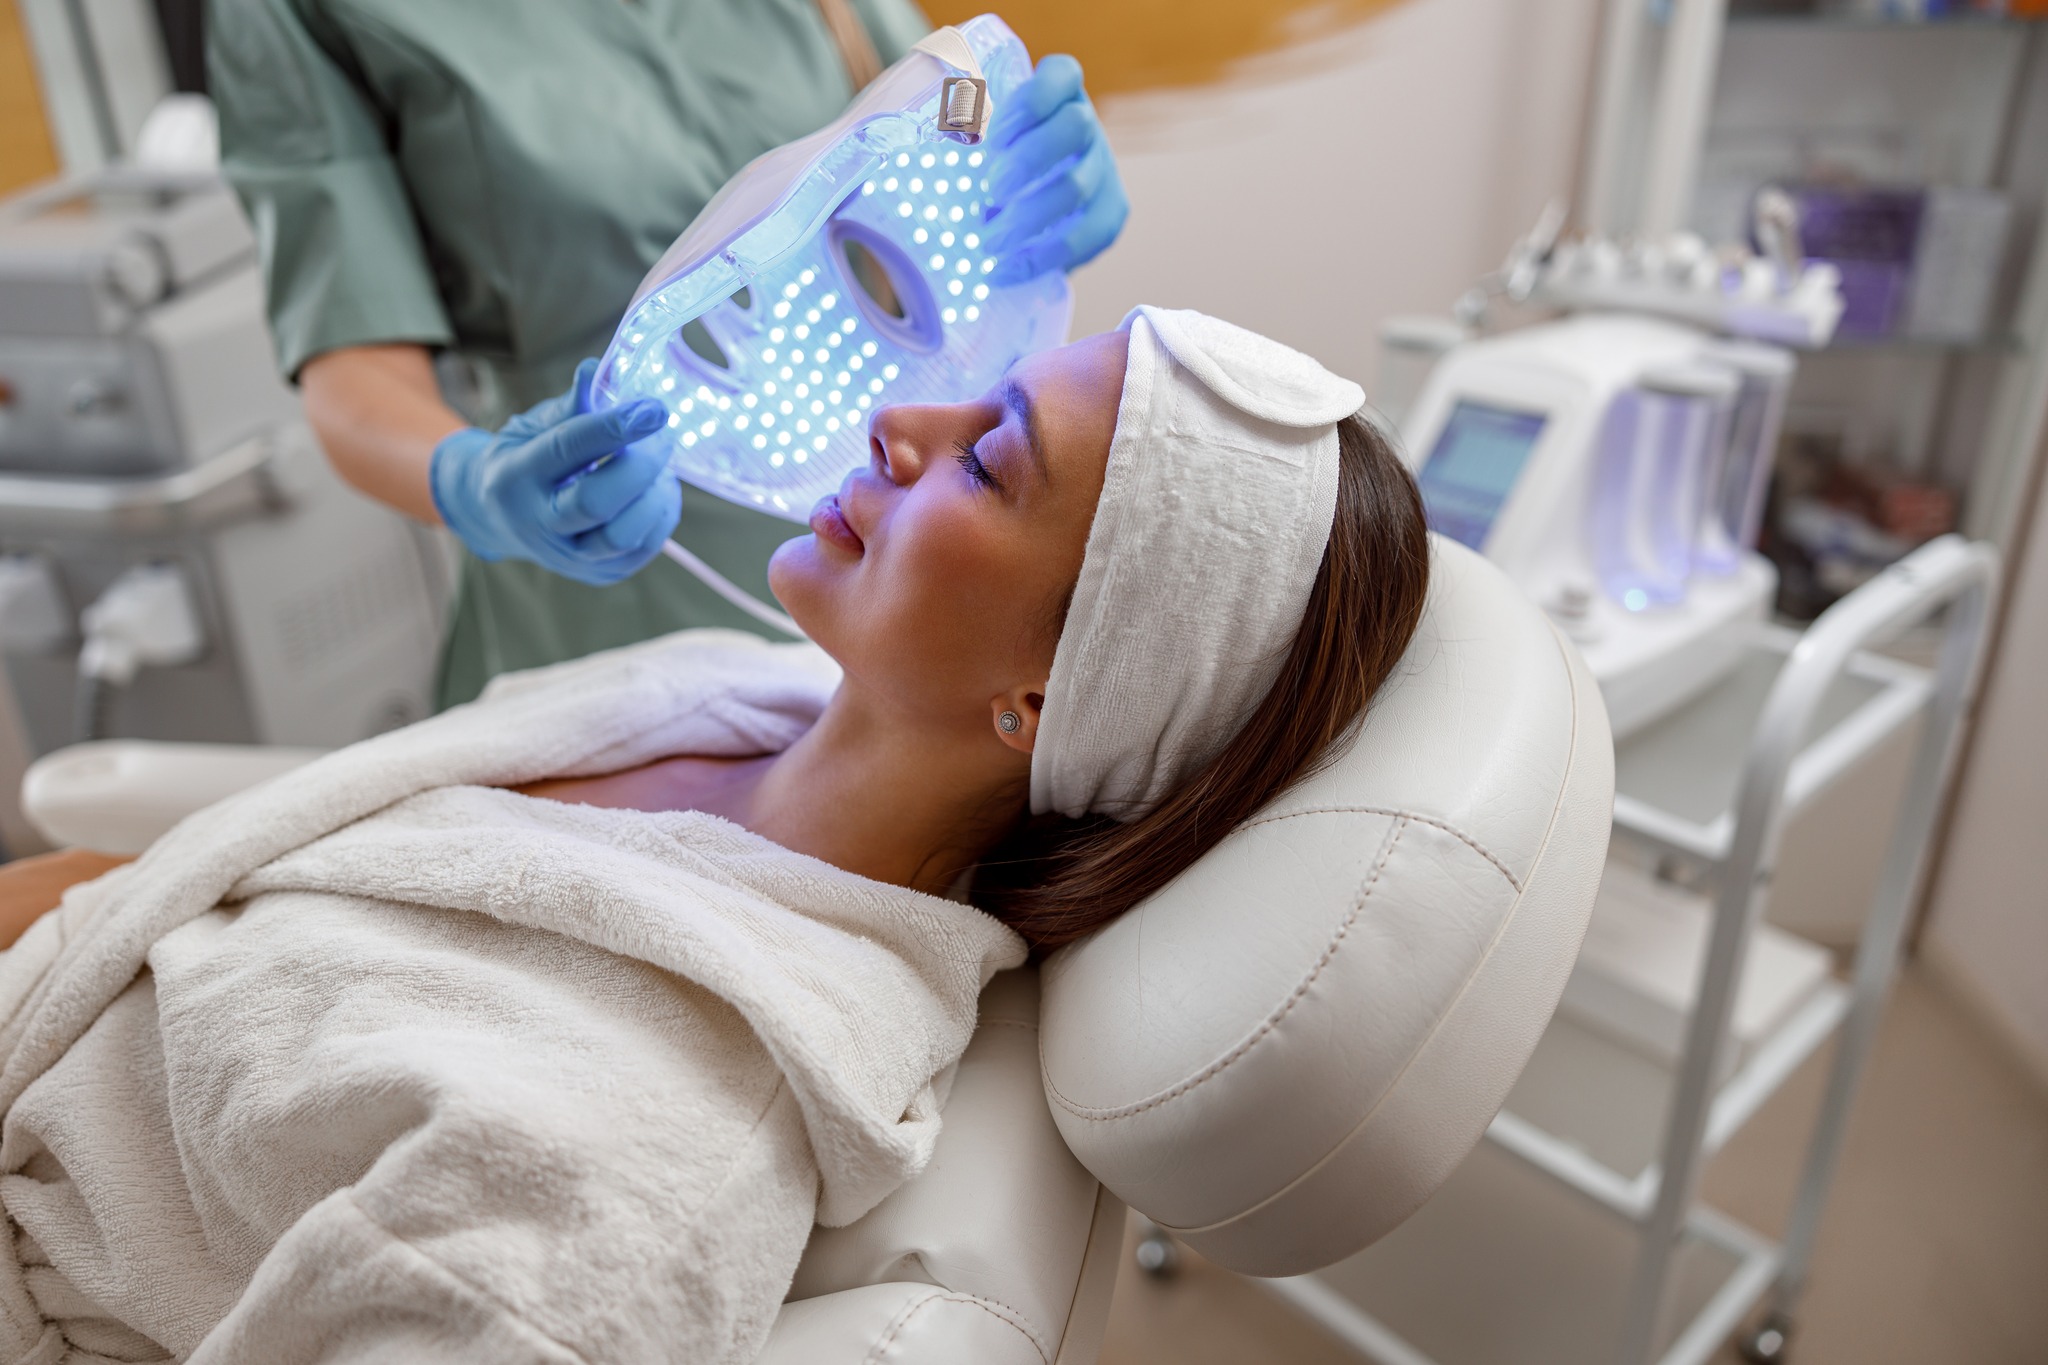 Illuminating Beauty: The Advantages of LED Light Therapy for Skin Rejuvenation and Healing